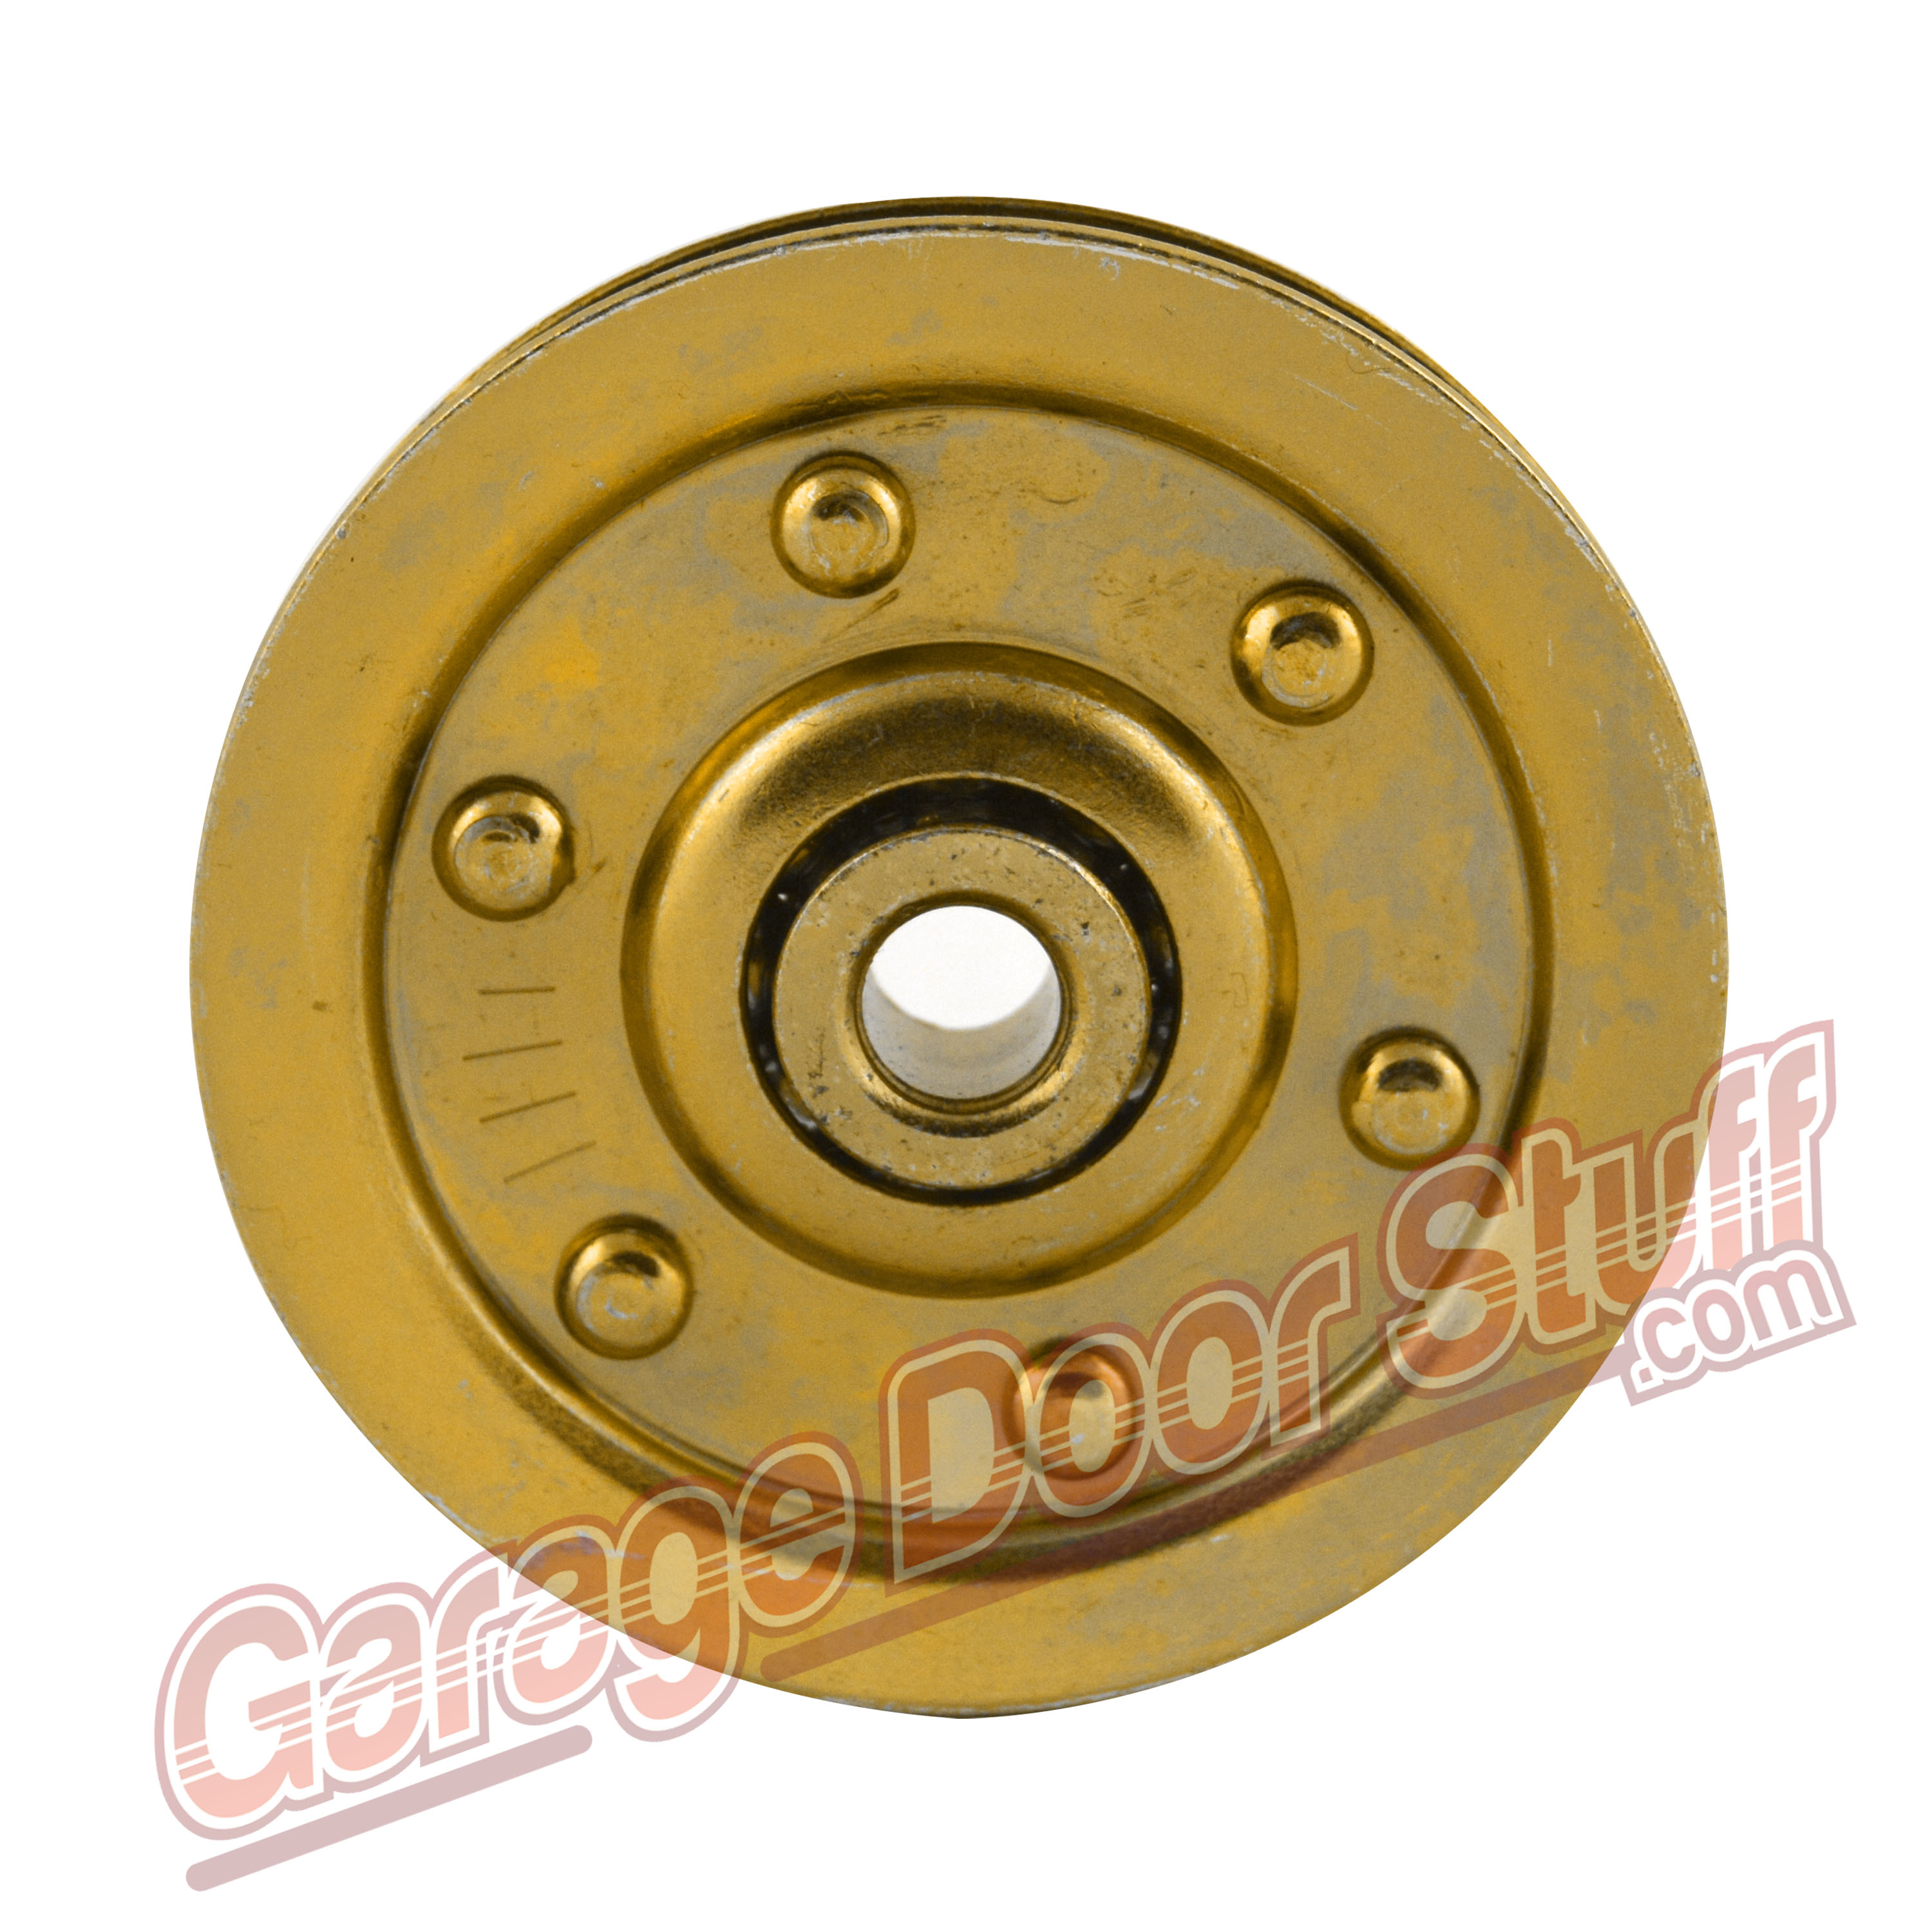 4" Heavy Duty Sheave Pulley New Authentic Barn Garage Door Parts OHD 3/8 Bore 